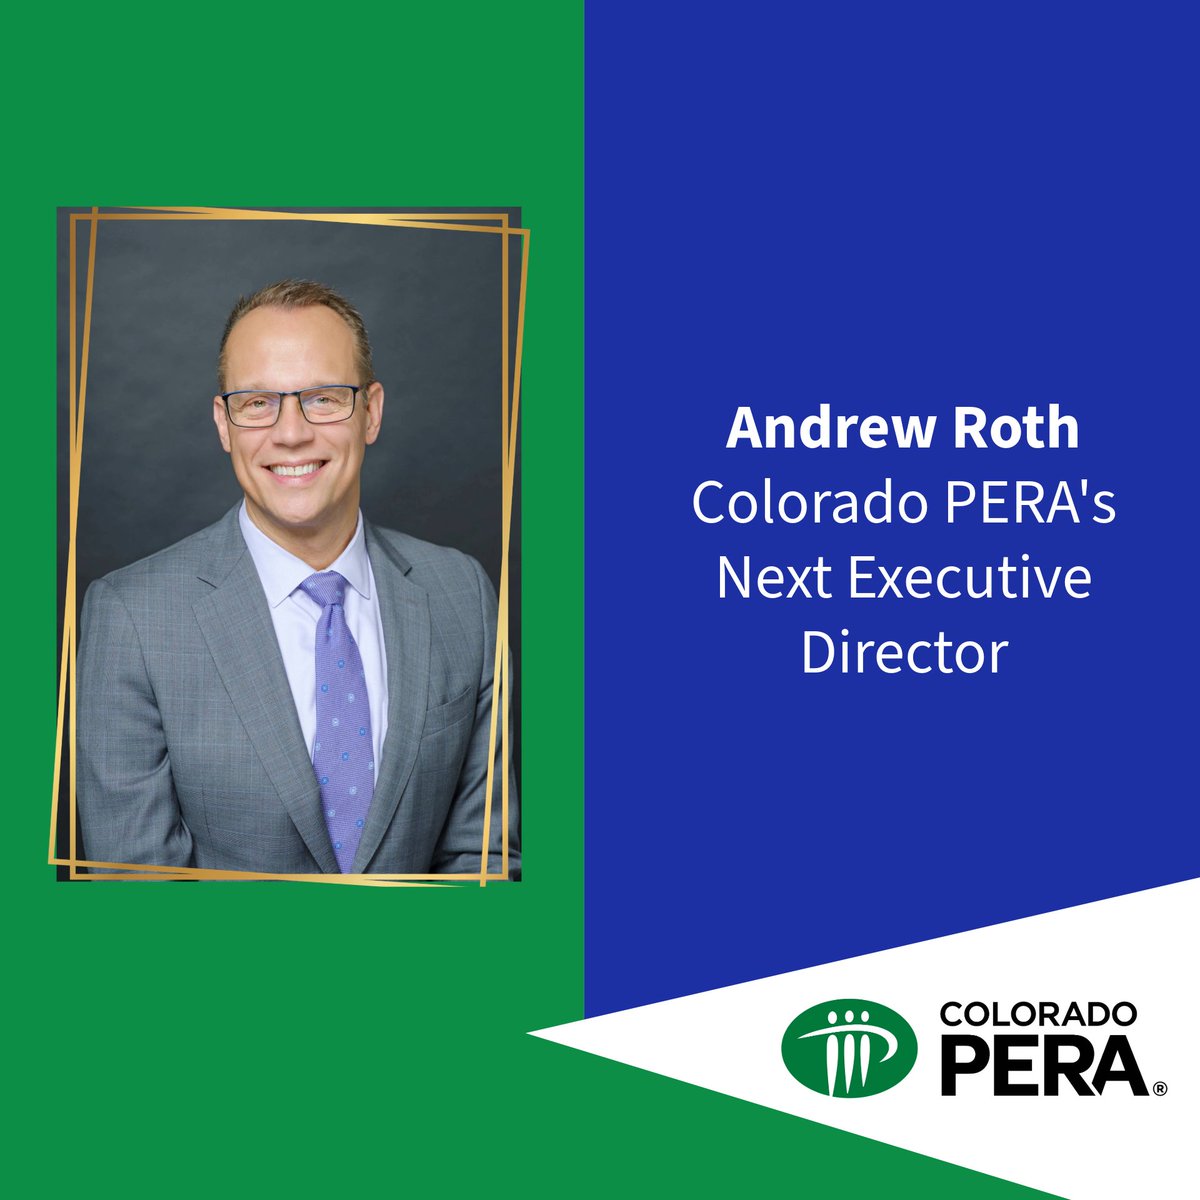 The Colorado PERA Board of Trustees announced today that Andrew Roth has been named as PERA’s Chief Executive Officer/Executive Director, effective May 13. copera.org/colorado-pera-…